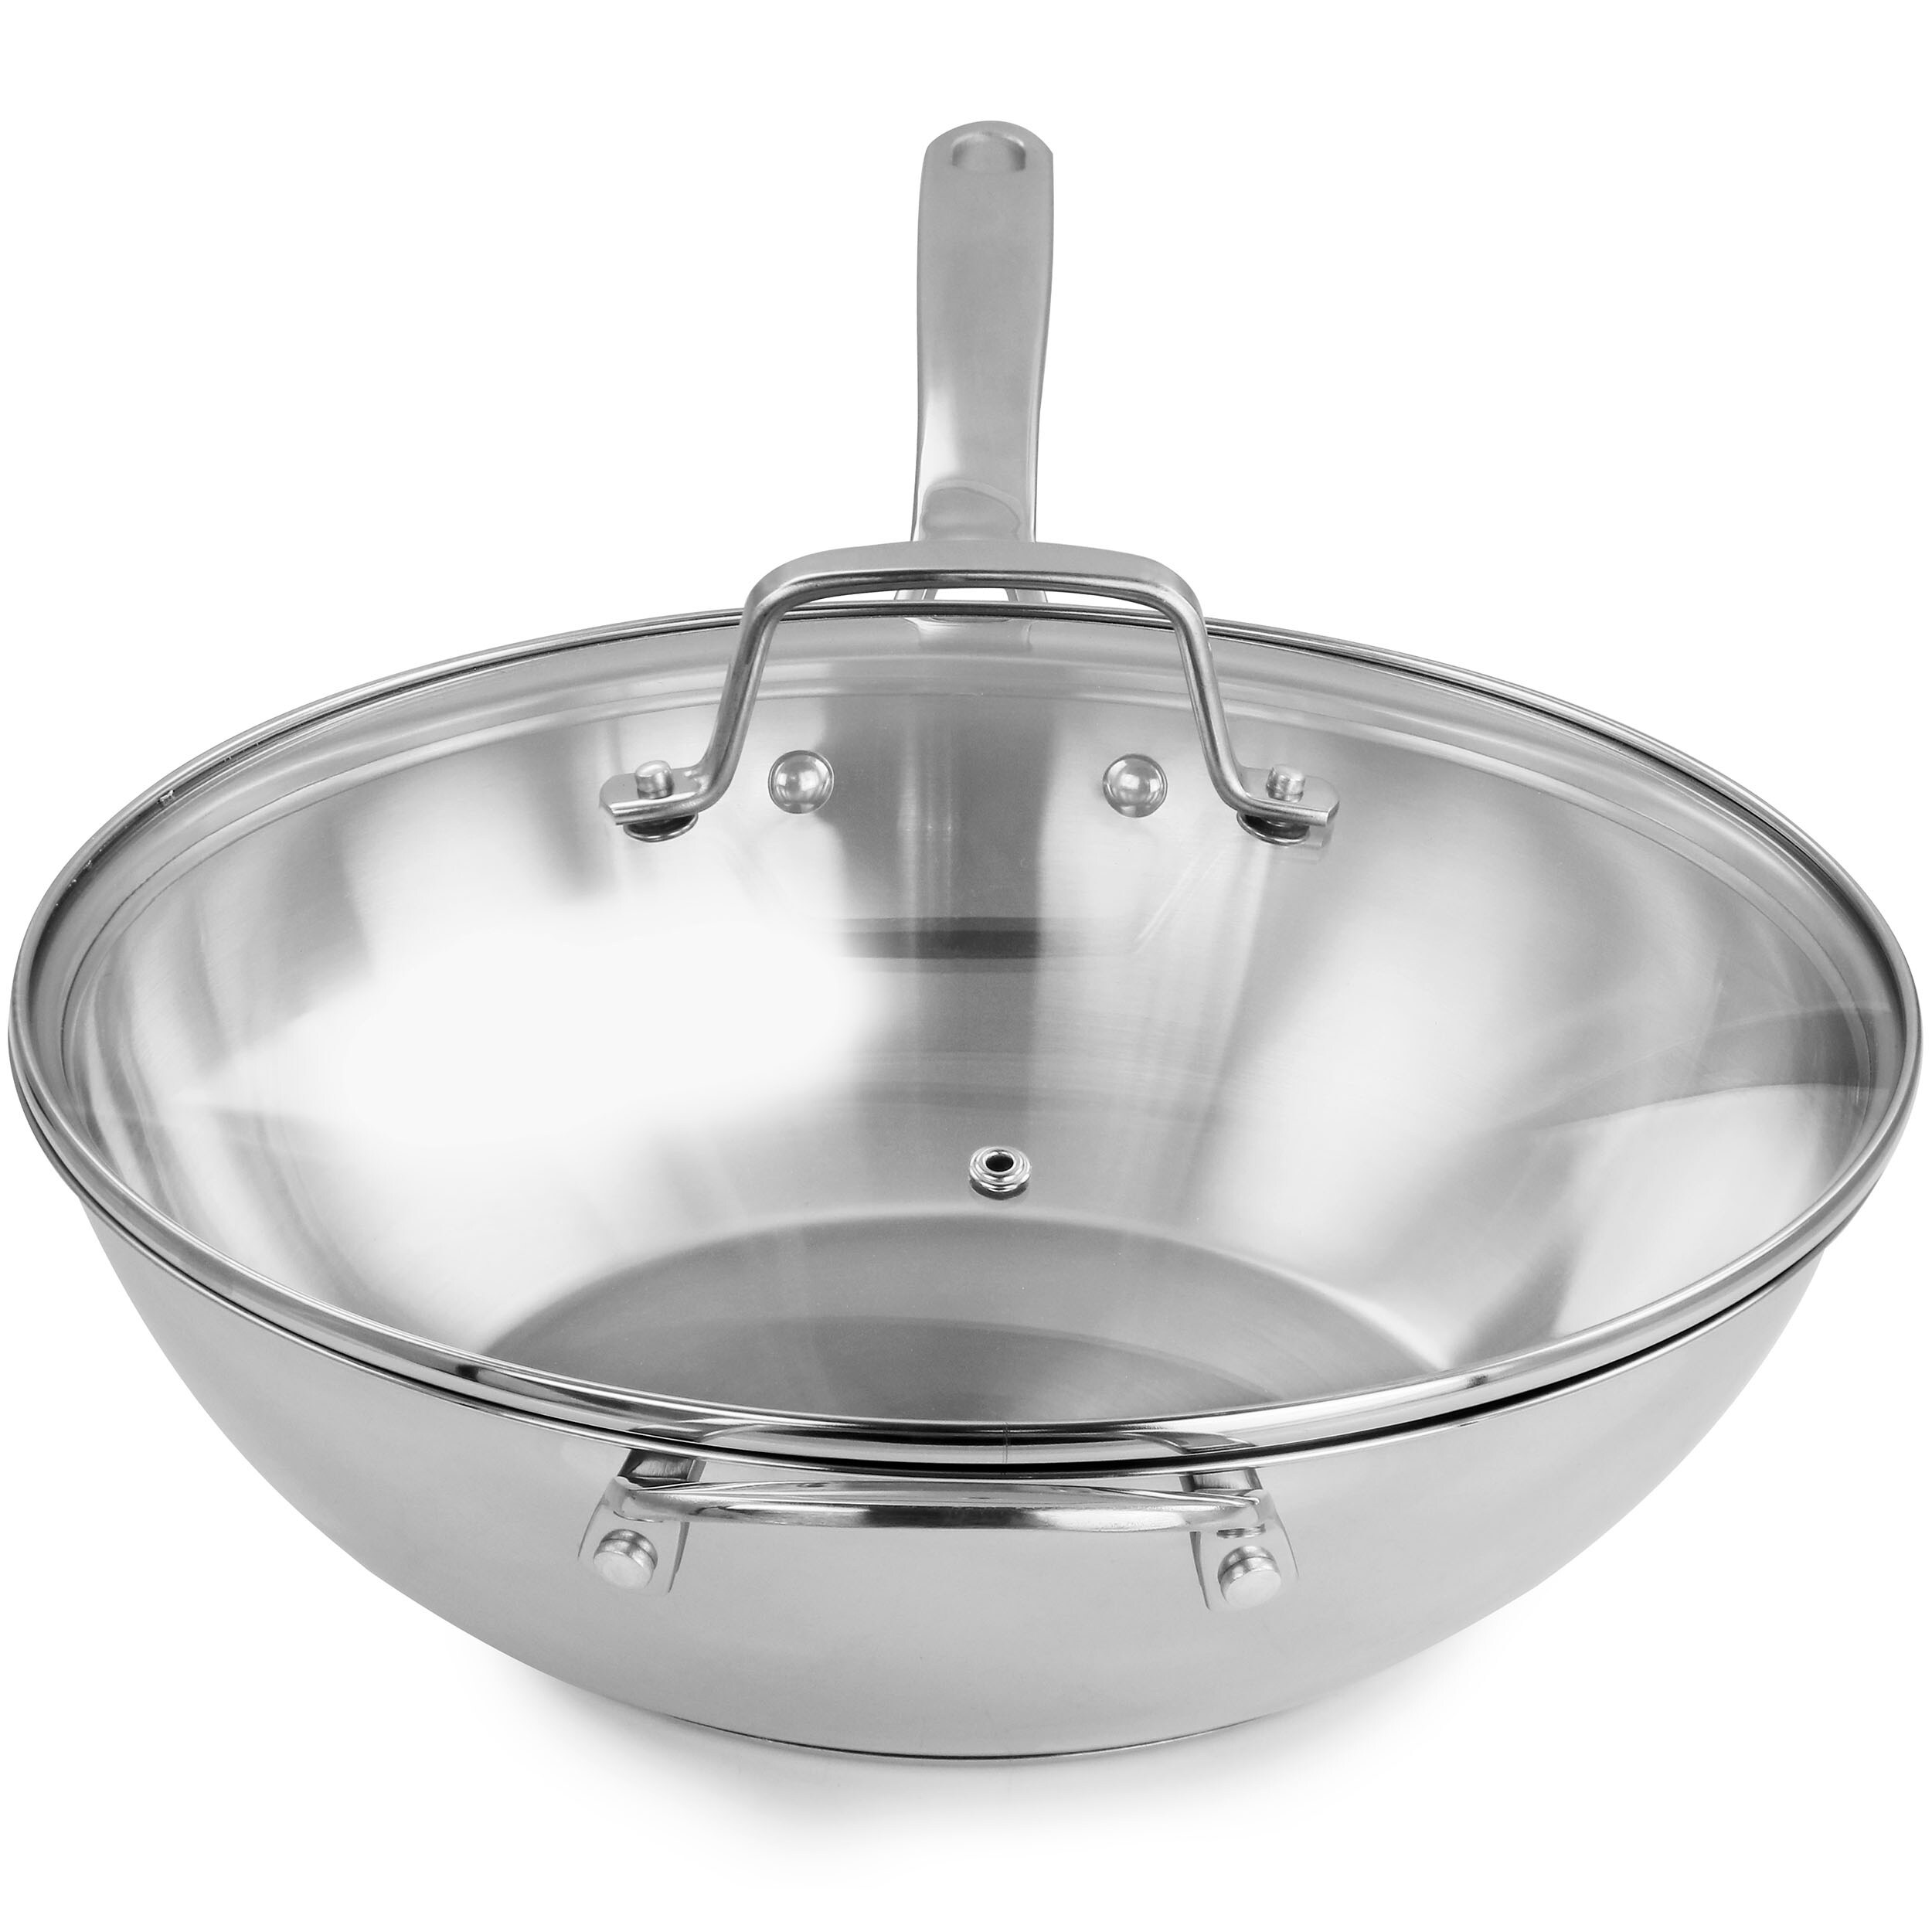 https://ak1.ostkcdn.com/images/products/is/images/direct/f97105c17223105c60d22b4cb4f142fcf8b5fd5c/Martha-Stewart-Stainless-Steel-Essential-12-Inch-Pan-with-Lid.jpg